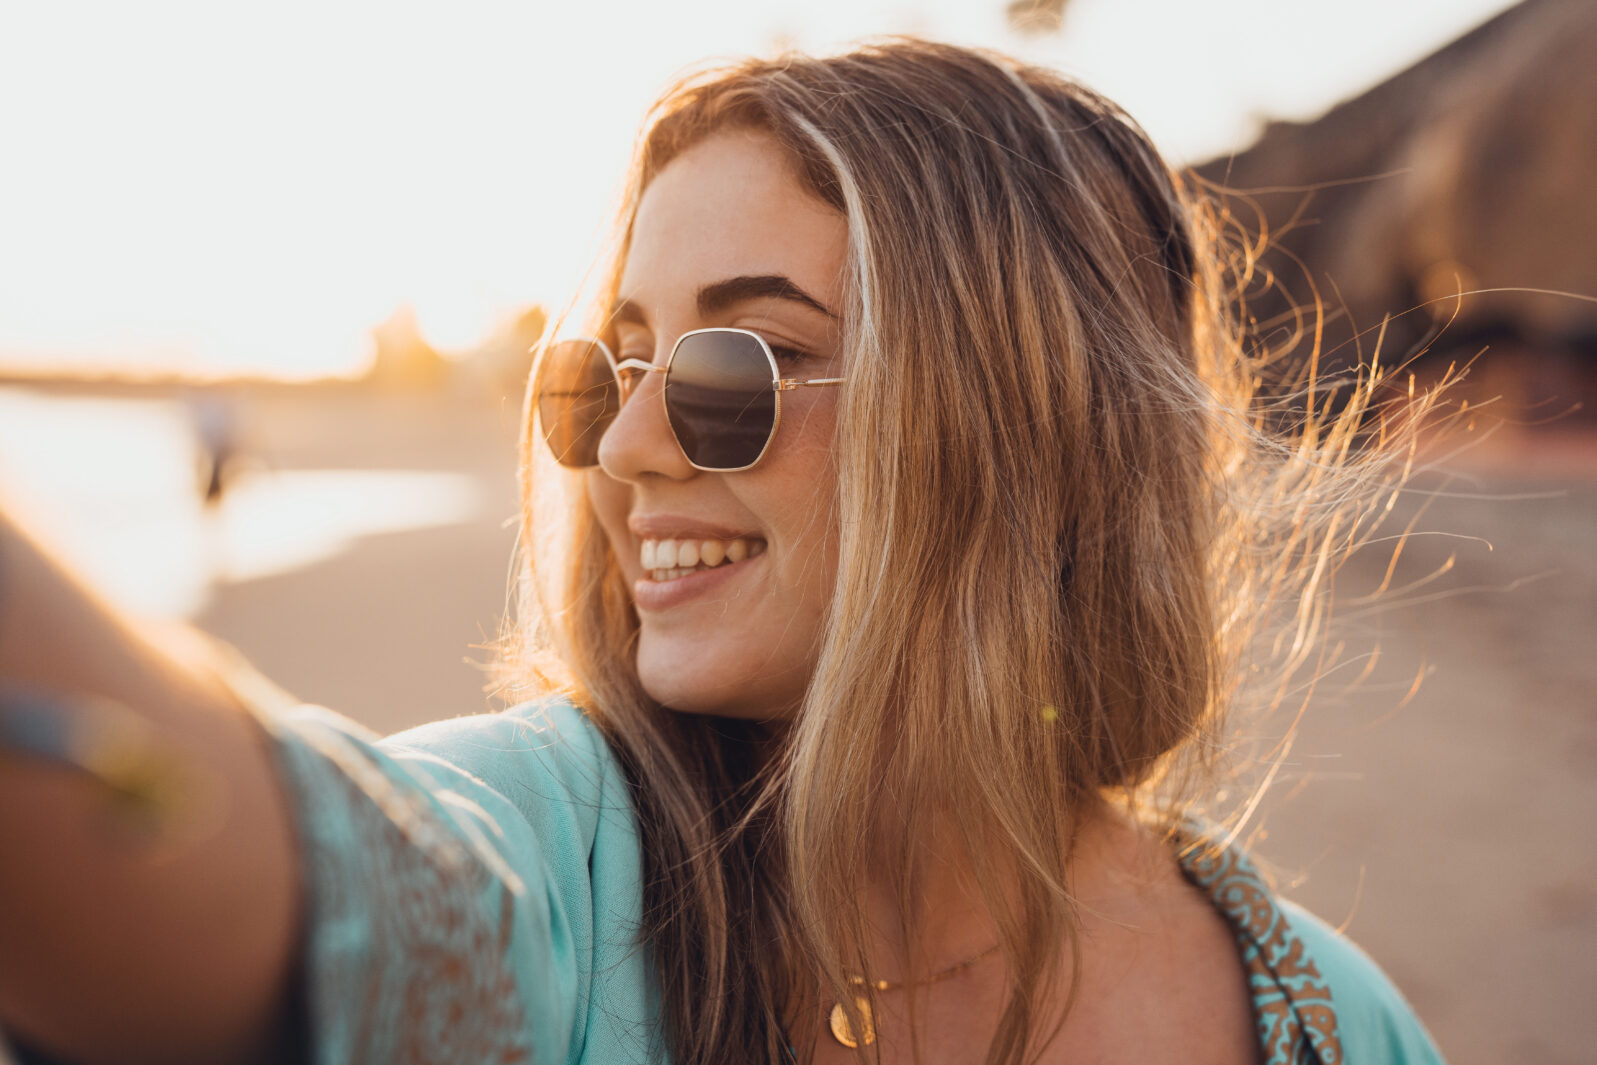 Portrait close up of one young beautiful attractive blonde young girl holding camera and taking selfie picture at the beach enjoying outdoors free time with sunset in the background.